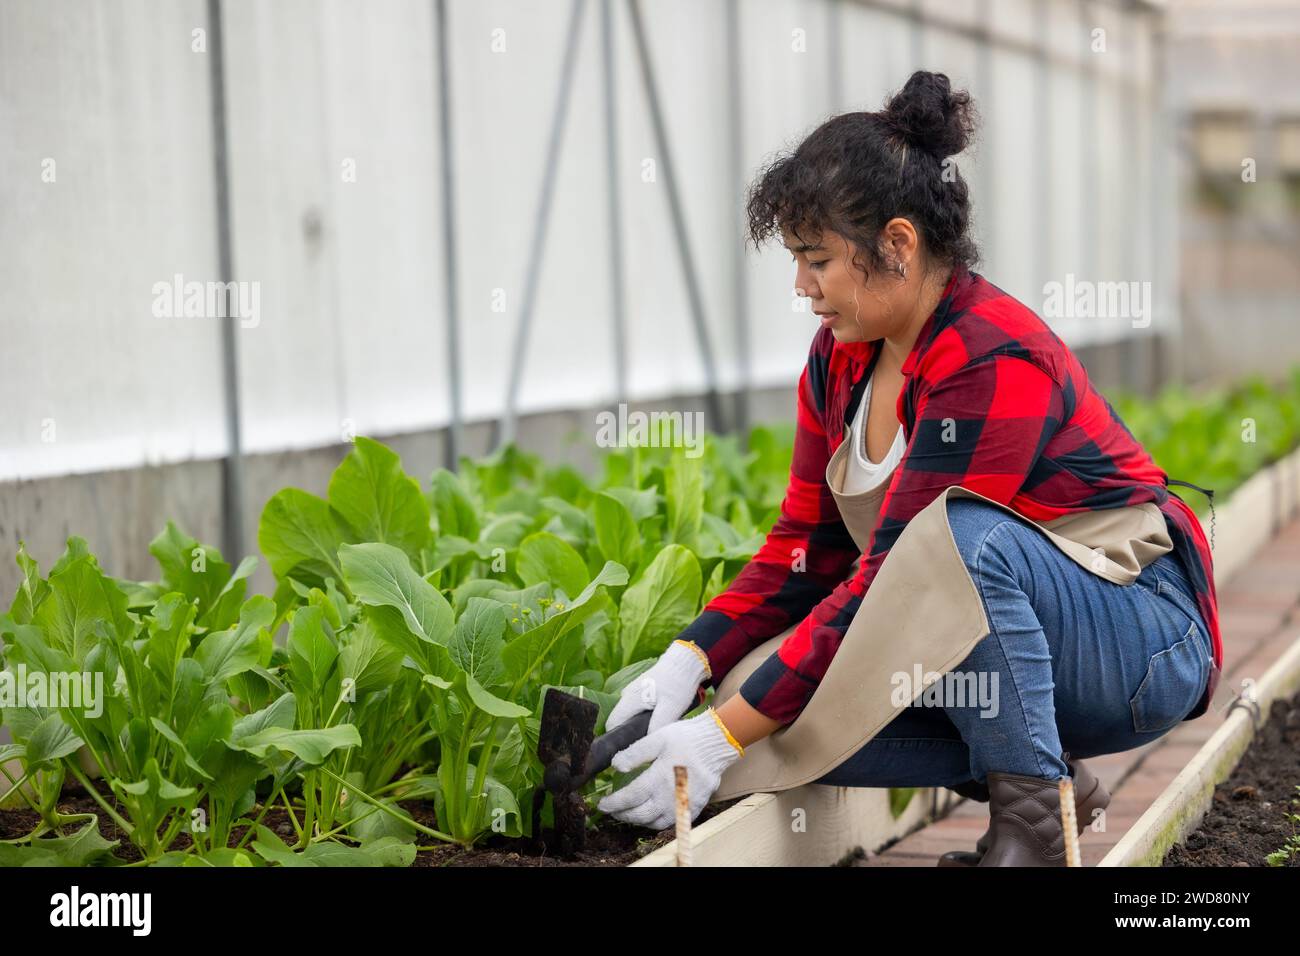 Women worker cultivated agriculture crops green Chinese Flowering Cabbage in greenhouse organic agriculture farm Stock Photo